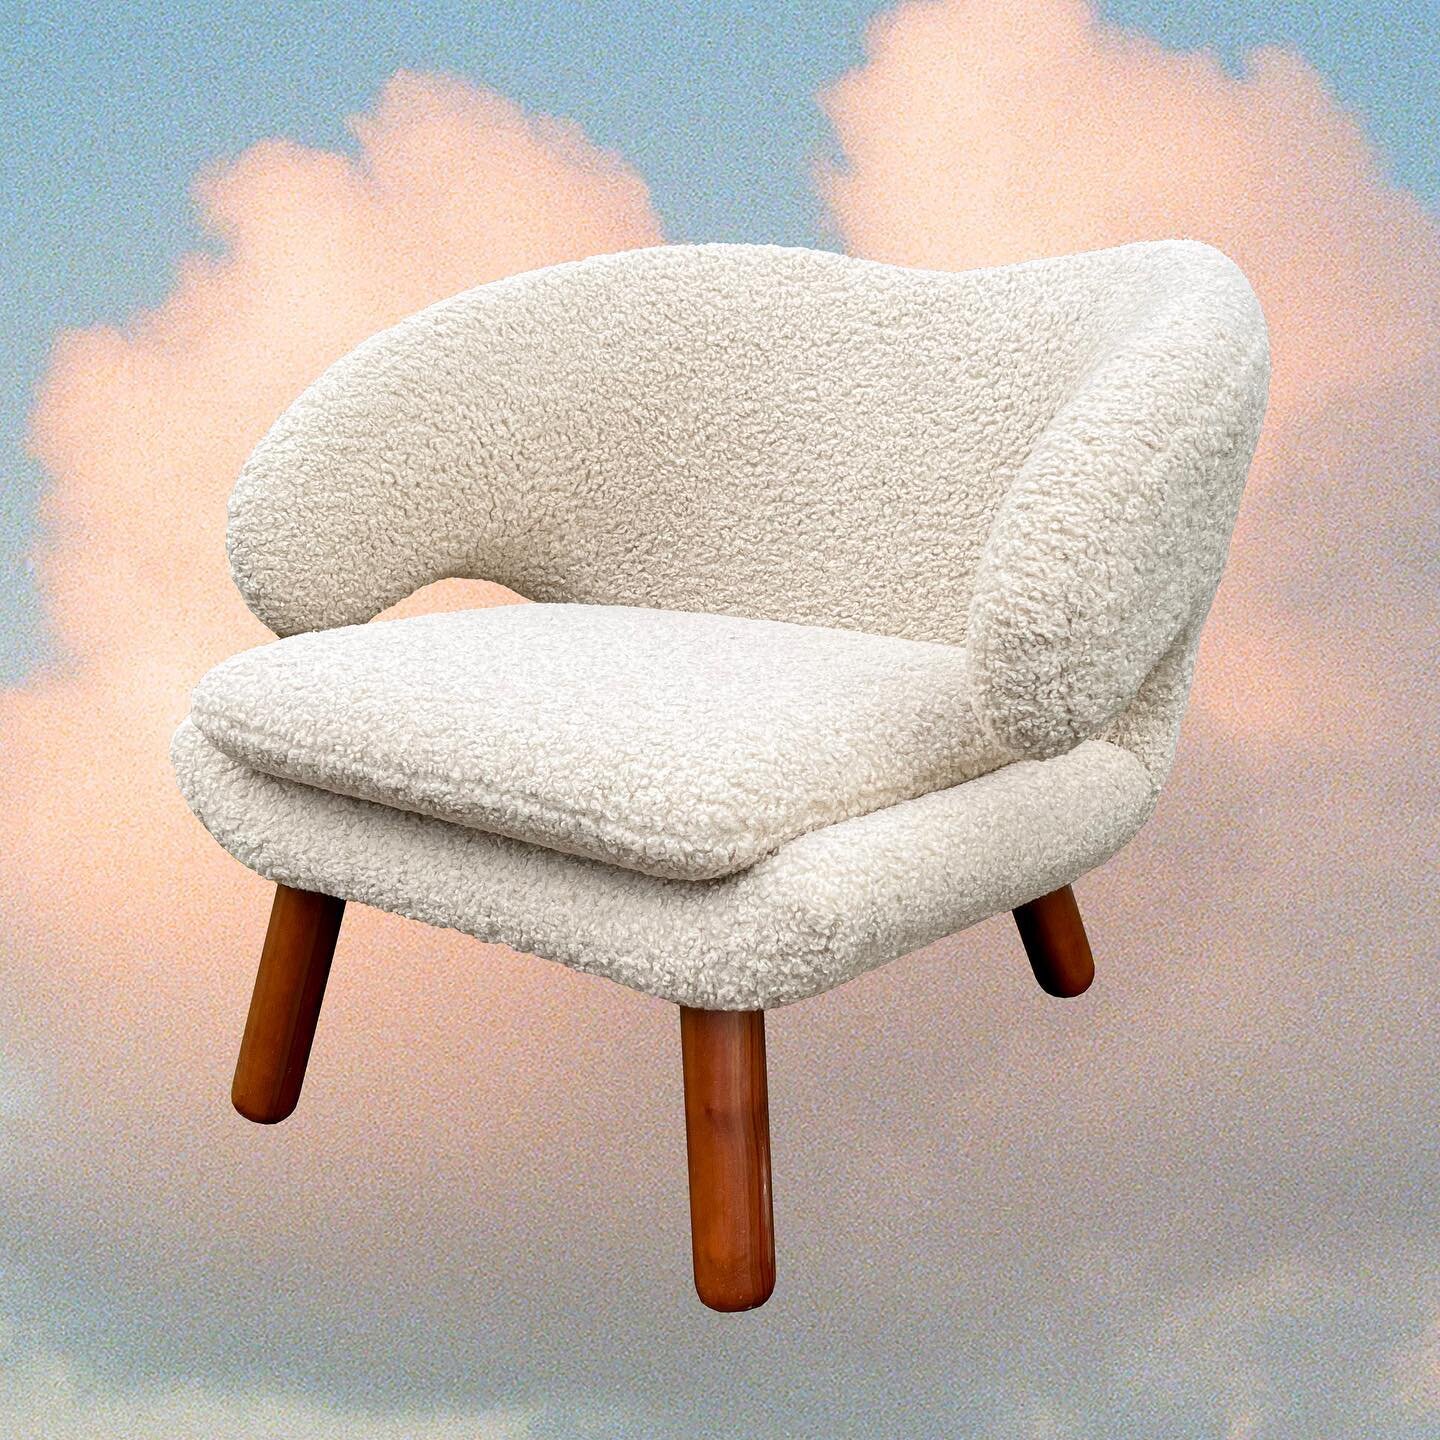 Just sweetened up this Pelican chair originally designed by the iconic Danish designer Finn Juhl in 1940. Restored in a faux sheepskin. A cloud. A whisper. A moment. A dream within a dream. Always and forever the most amazing projects for @midnightsu